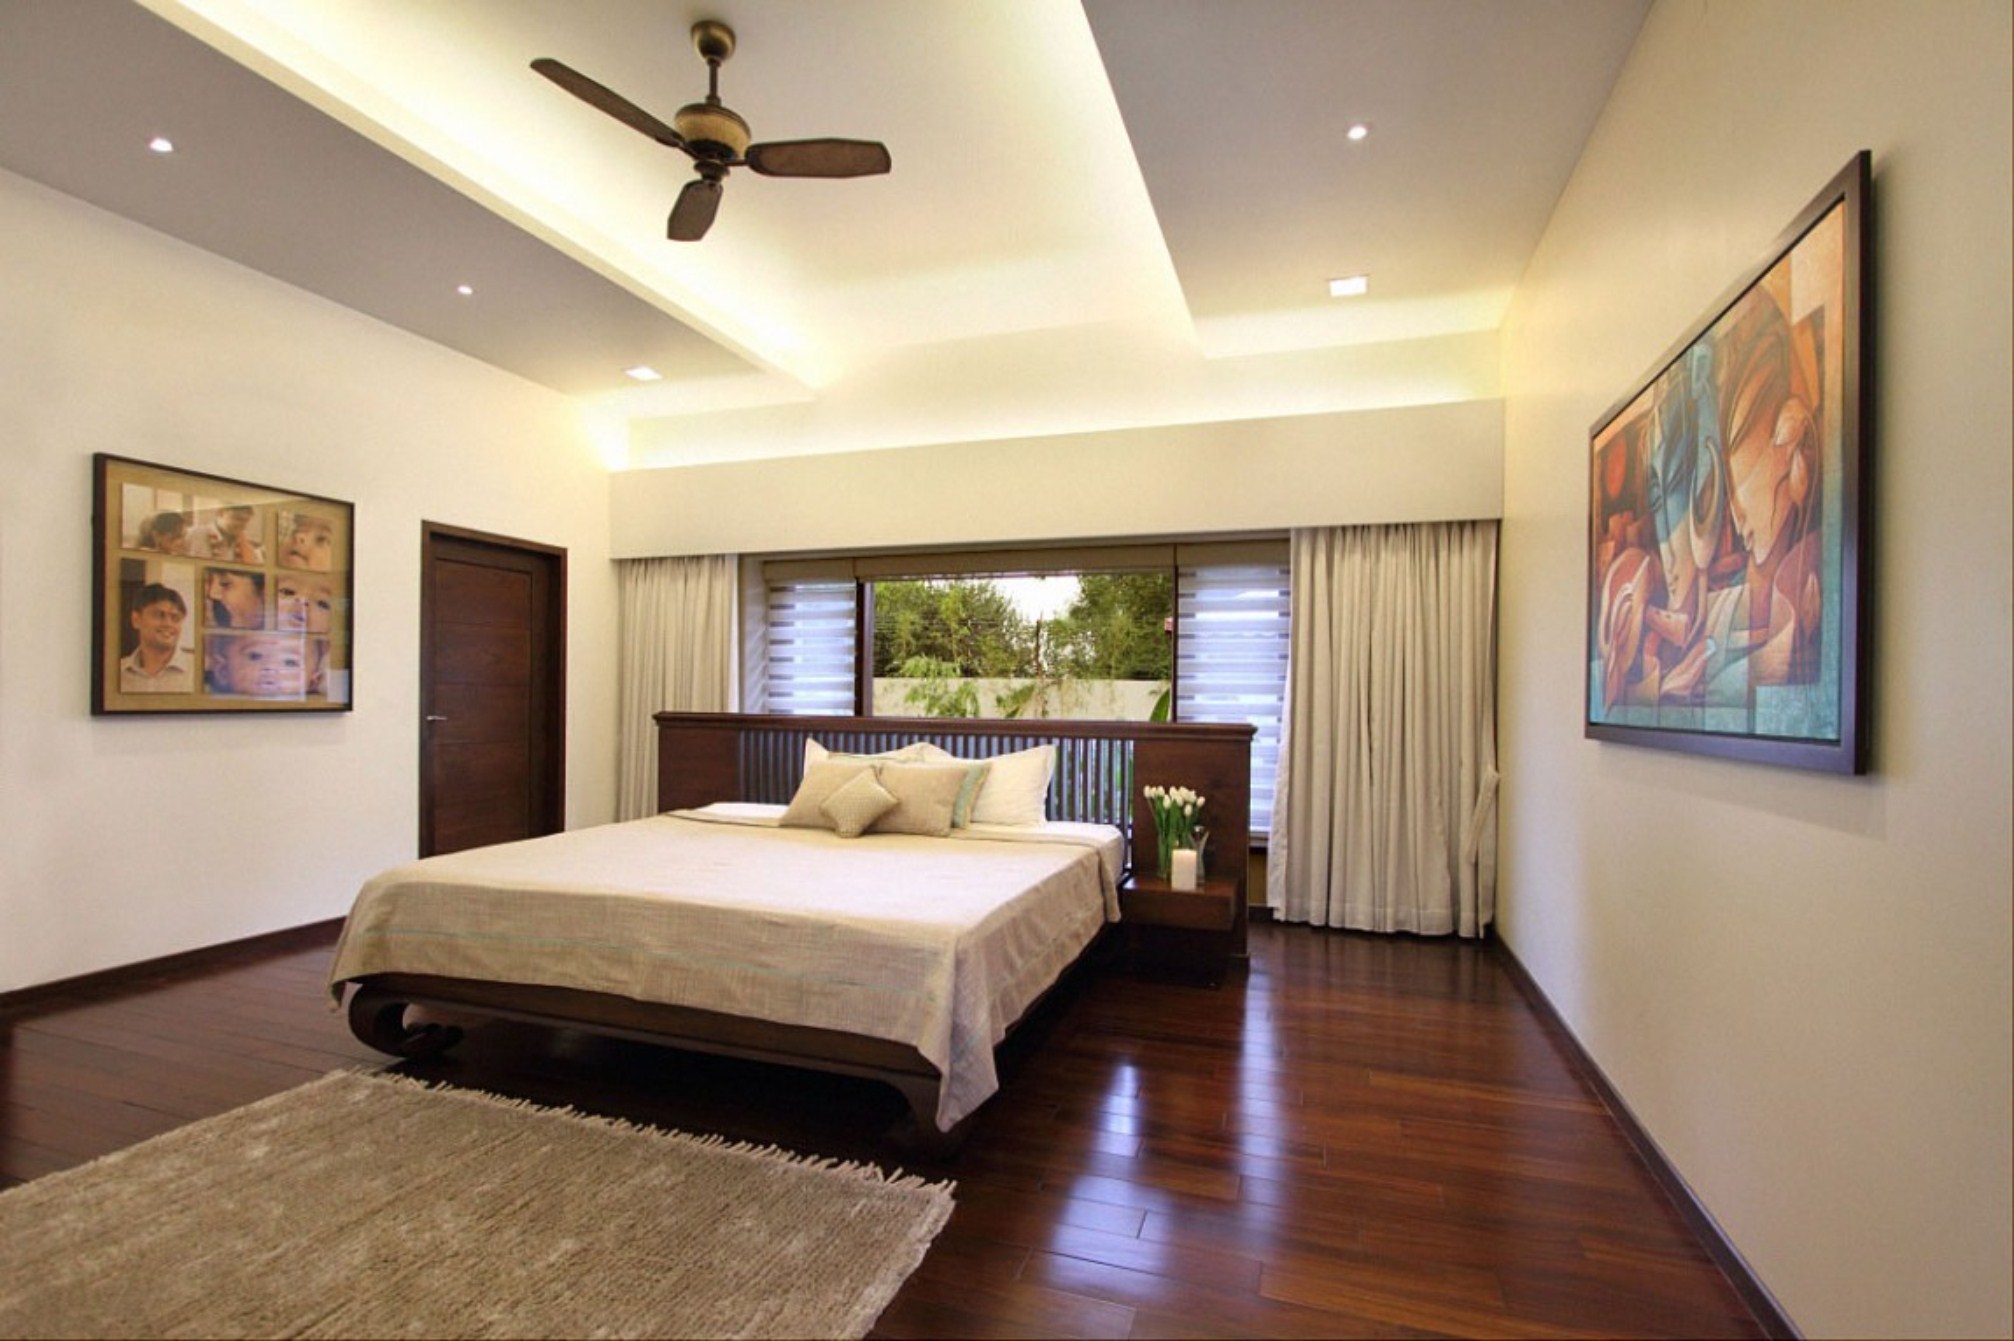 17 Fascinating Bedroom Lighting Ideas That Everyone Should See,Mehandi Designs For Hands Easy And Simple